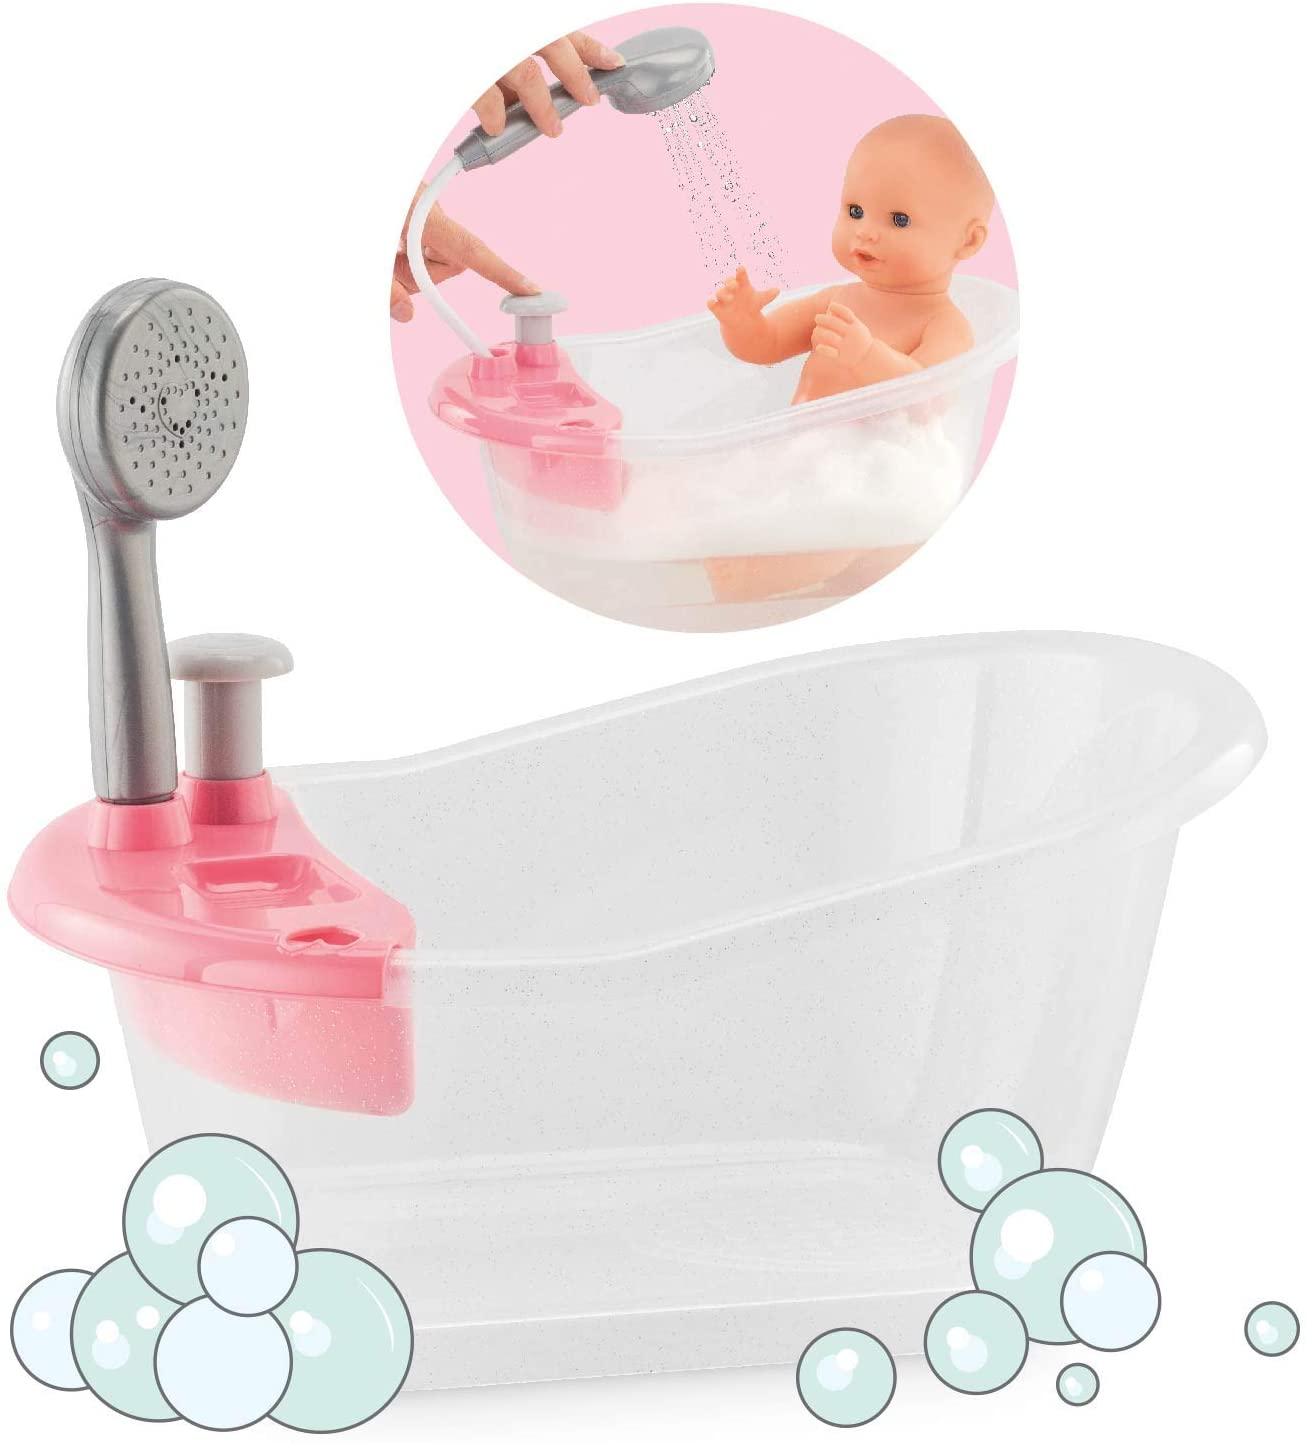 Bath set for dolls with accessories Ecoiffier Doctor Poupon